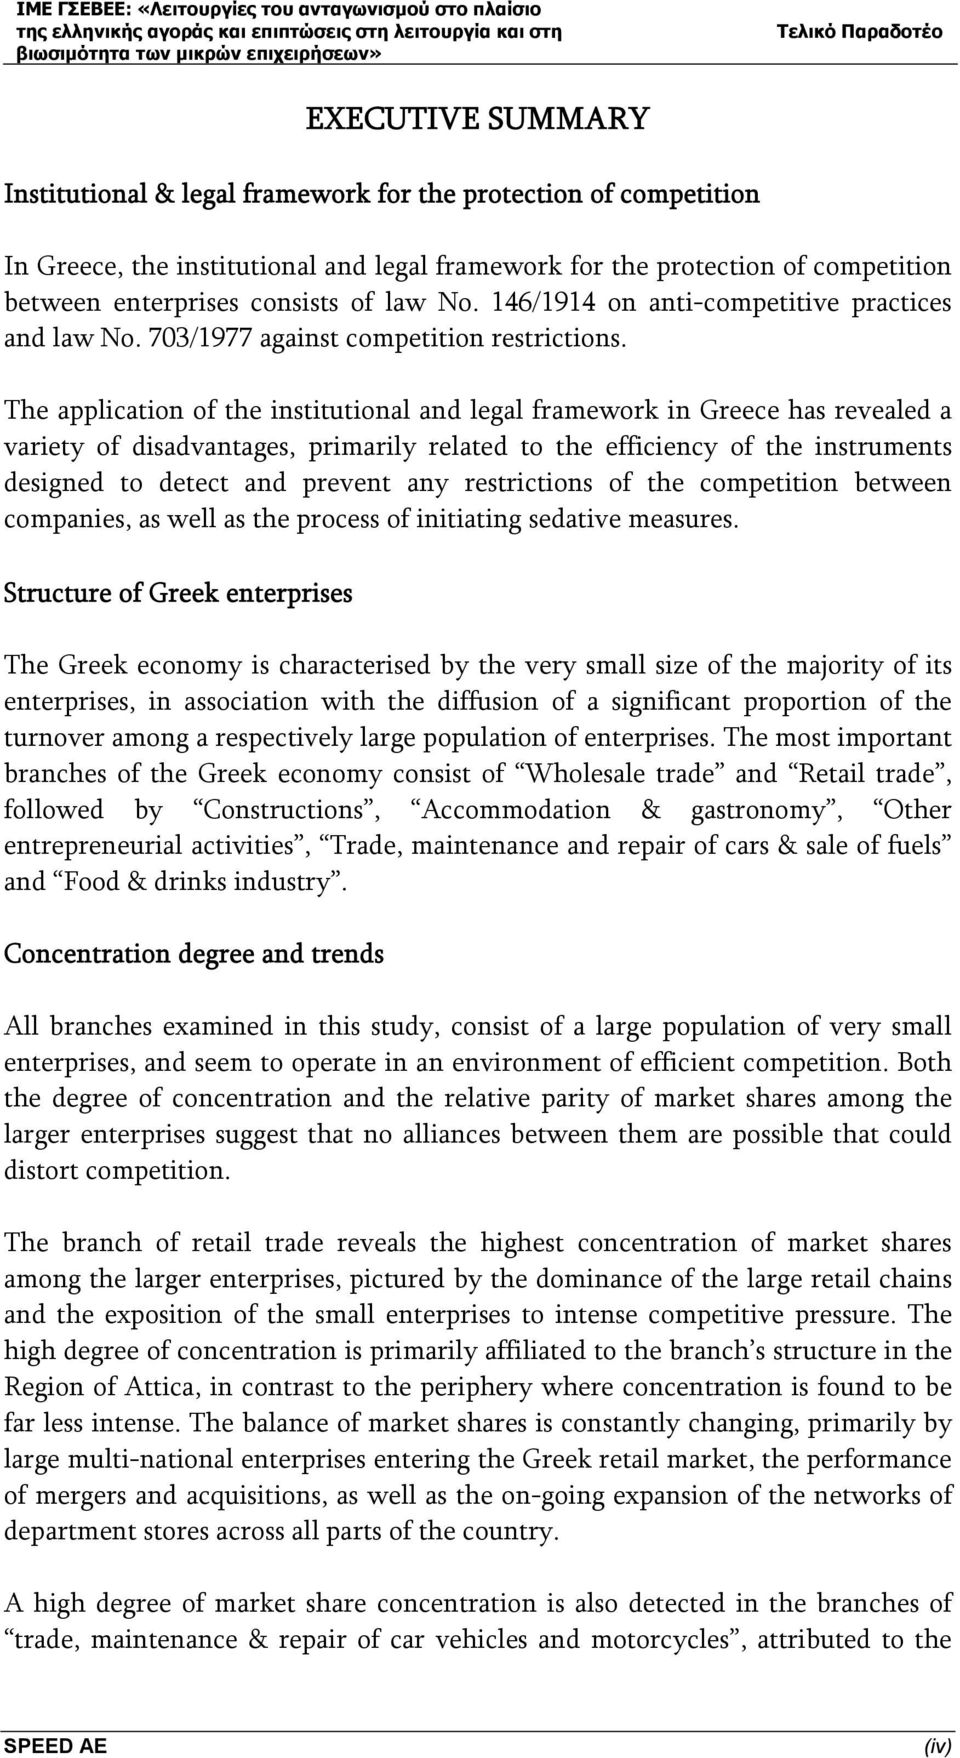 The application of the institutional and legal framework in Greece has revealed a variety of disadvantages, primarily related to the efficiency of the instruments designed to detect and prevent any